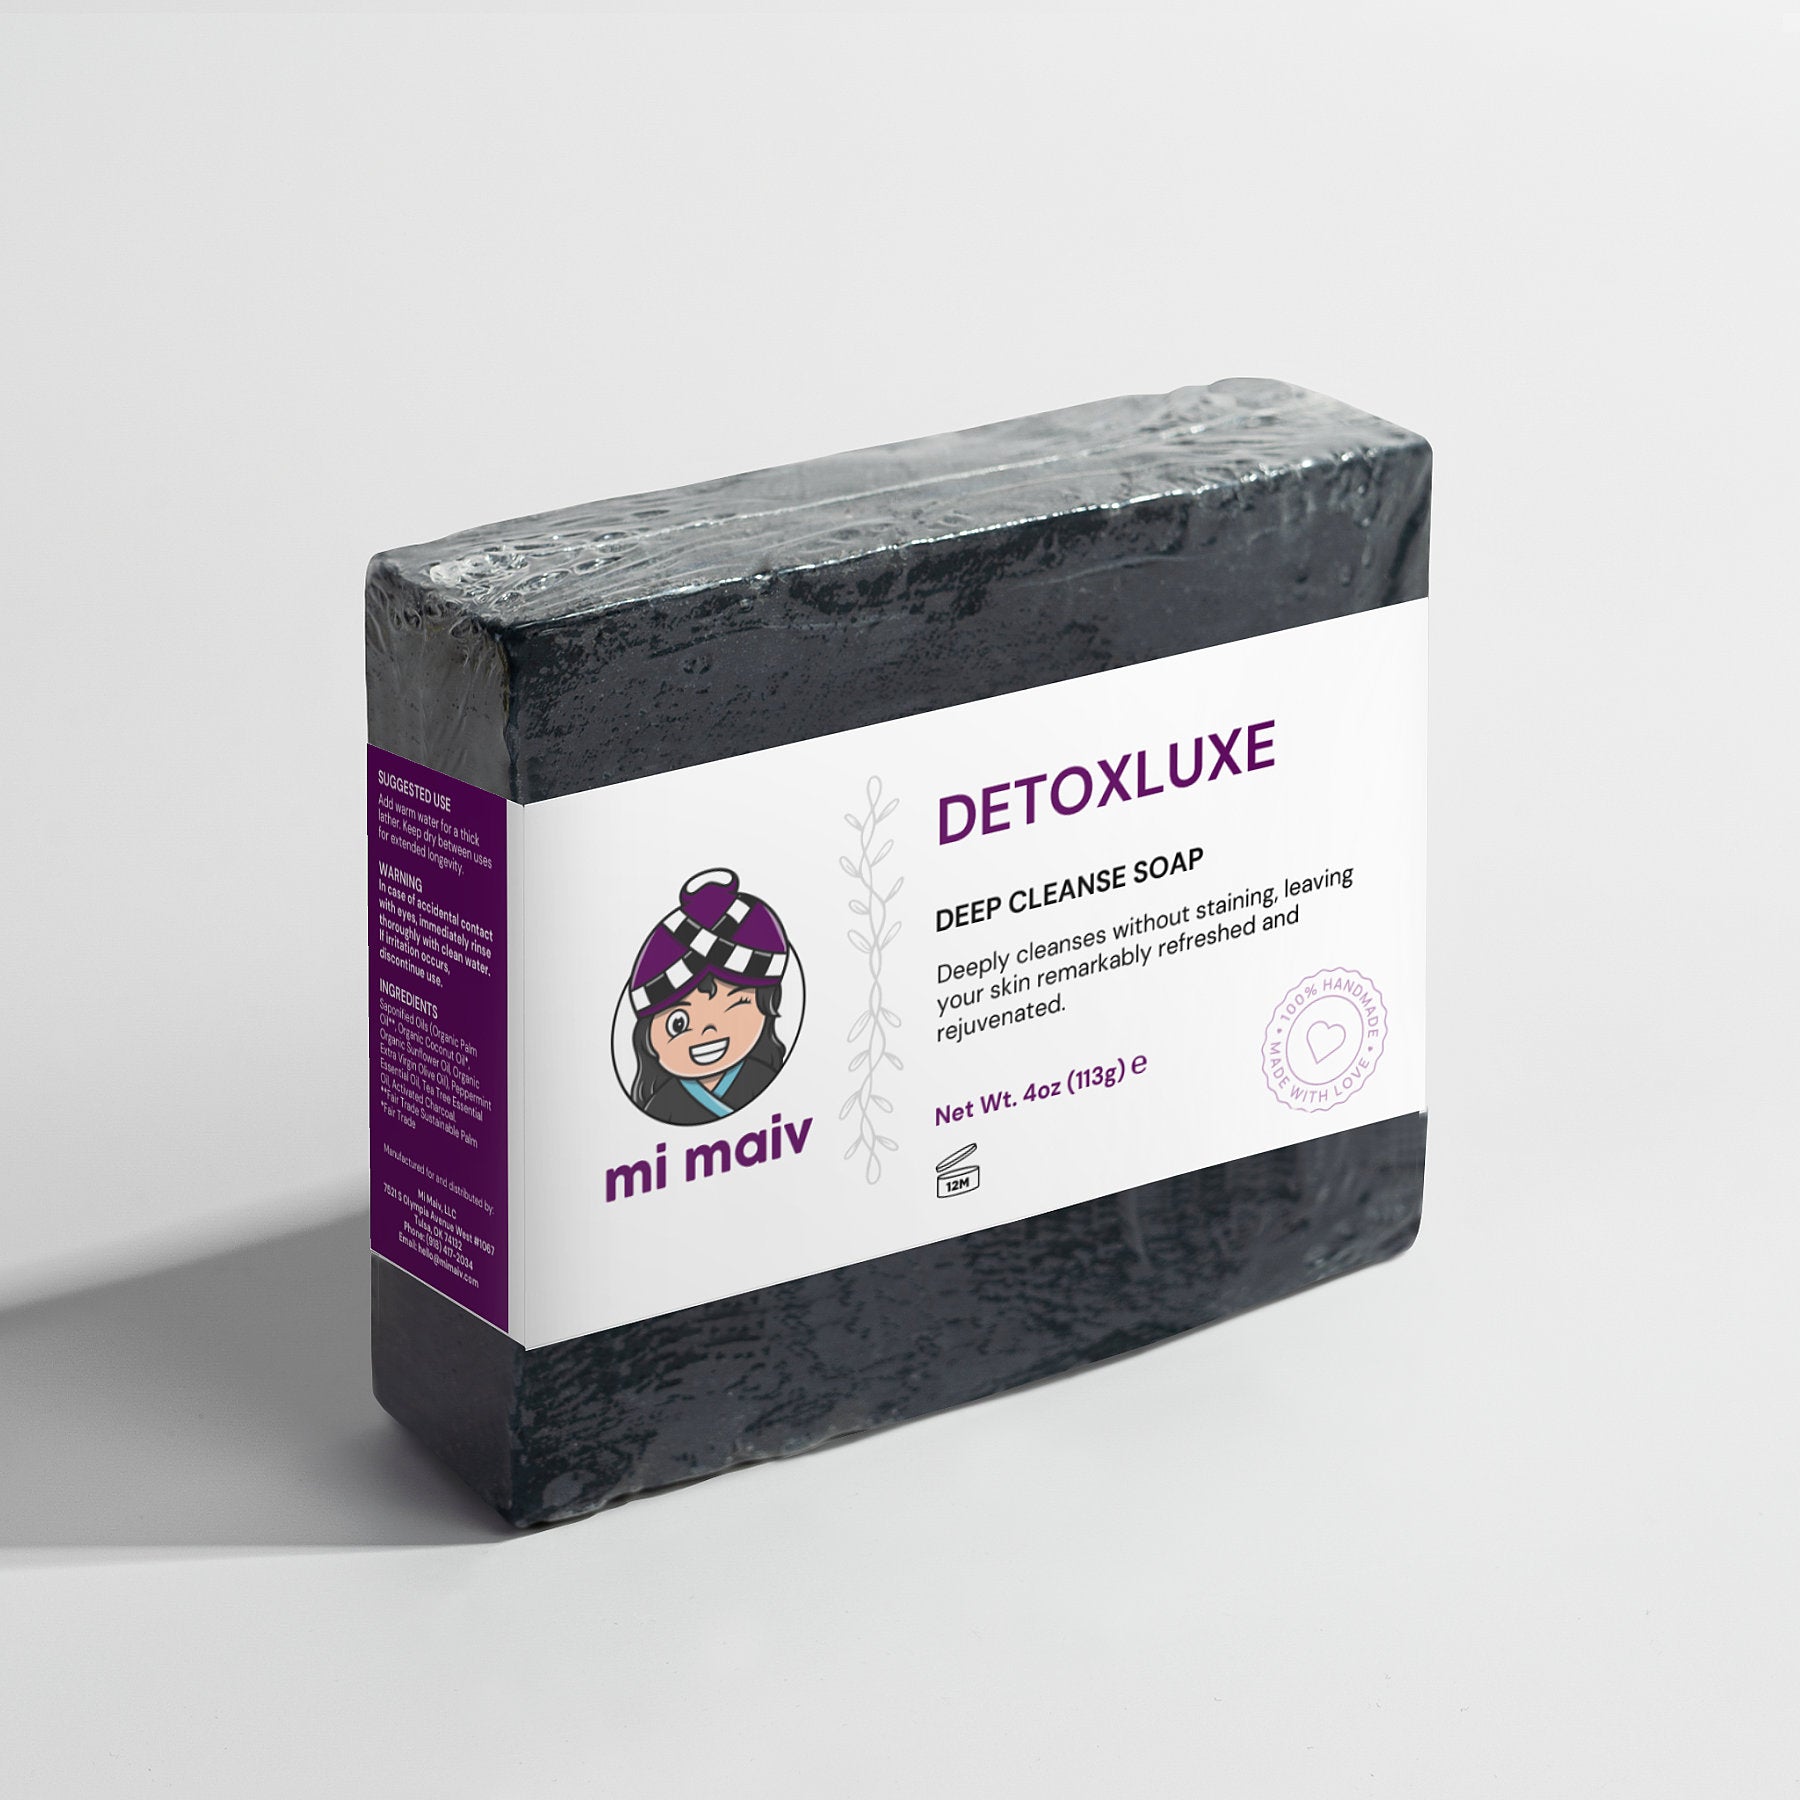 DetoxLuxe Deep Cleanse Soap, Handcrafted, 4 oz